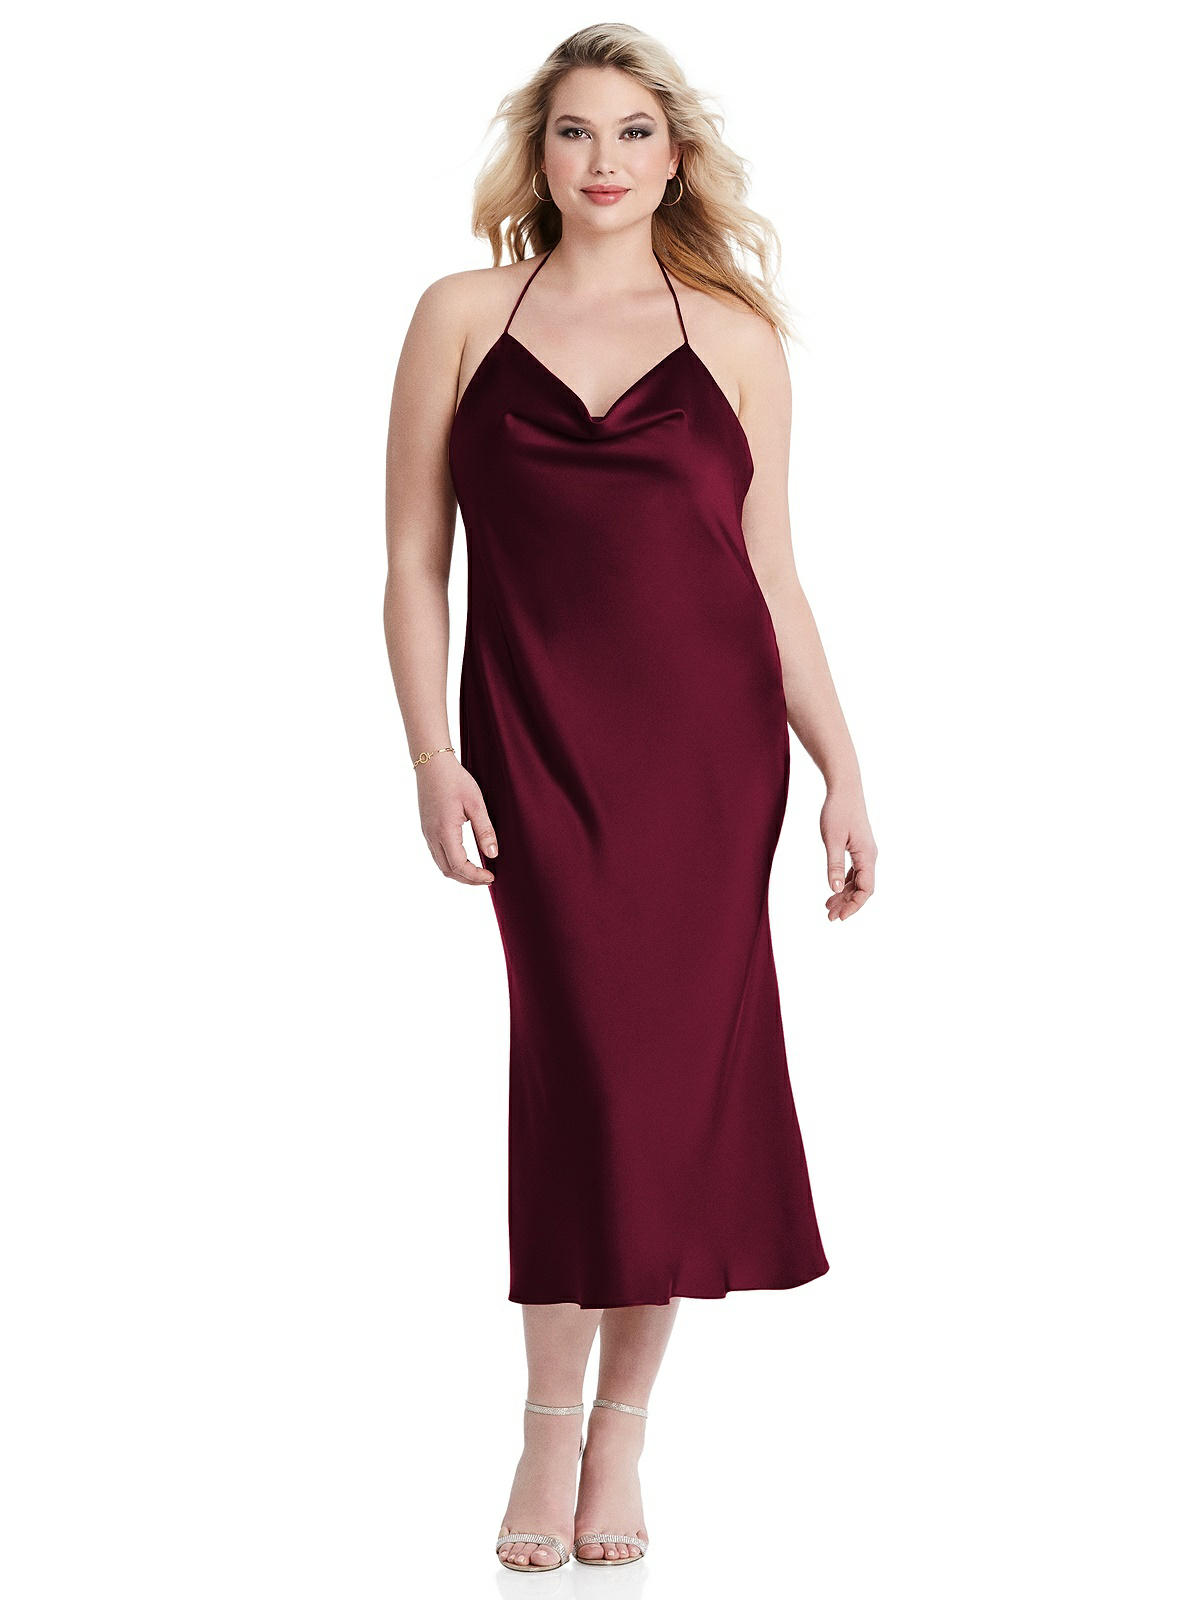 Piper Cabernet Red Satin Bridesmaids Dress by Dessy